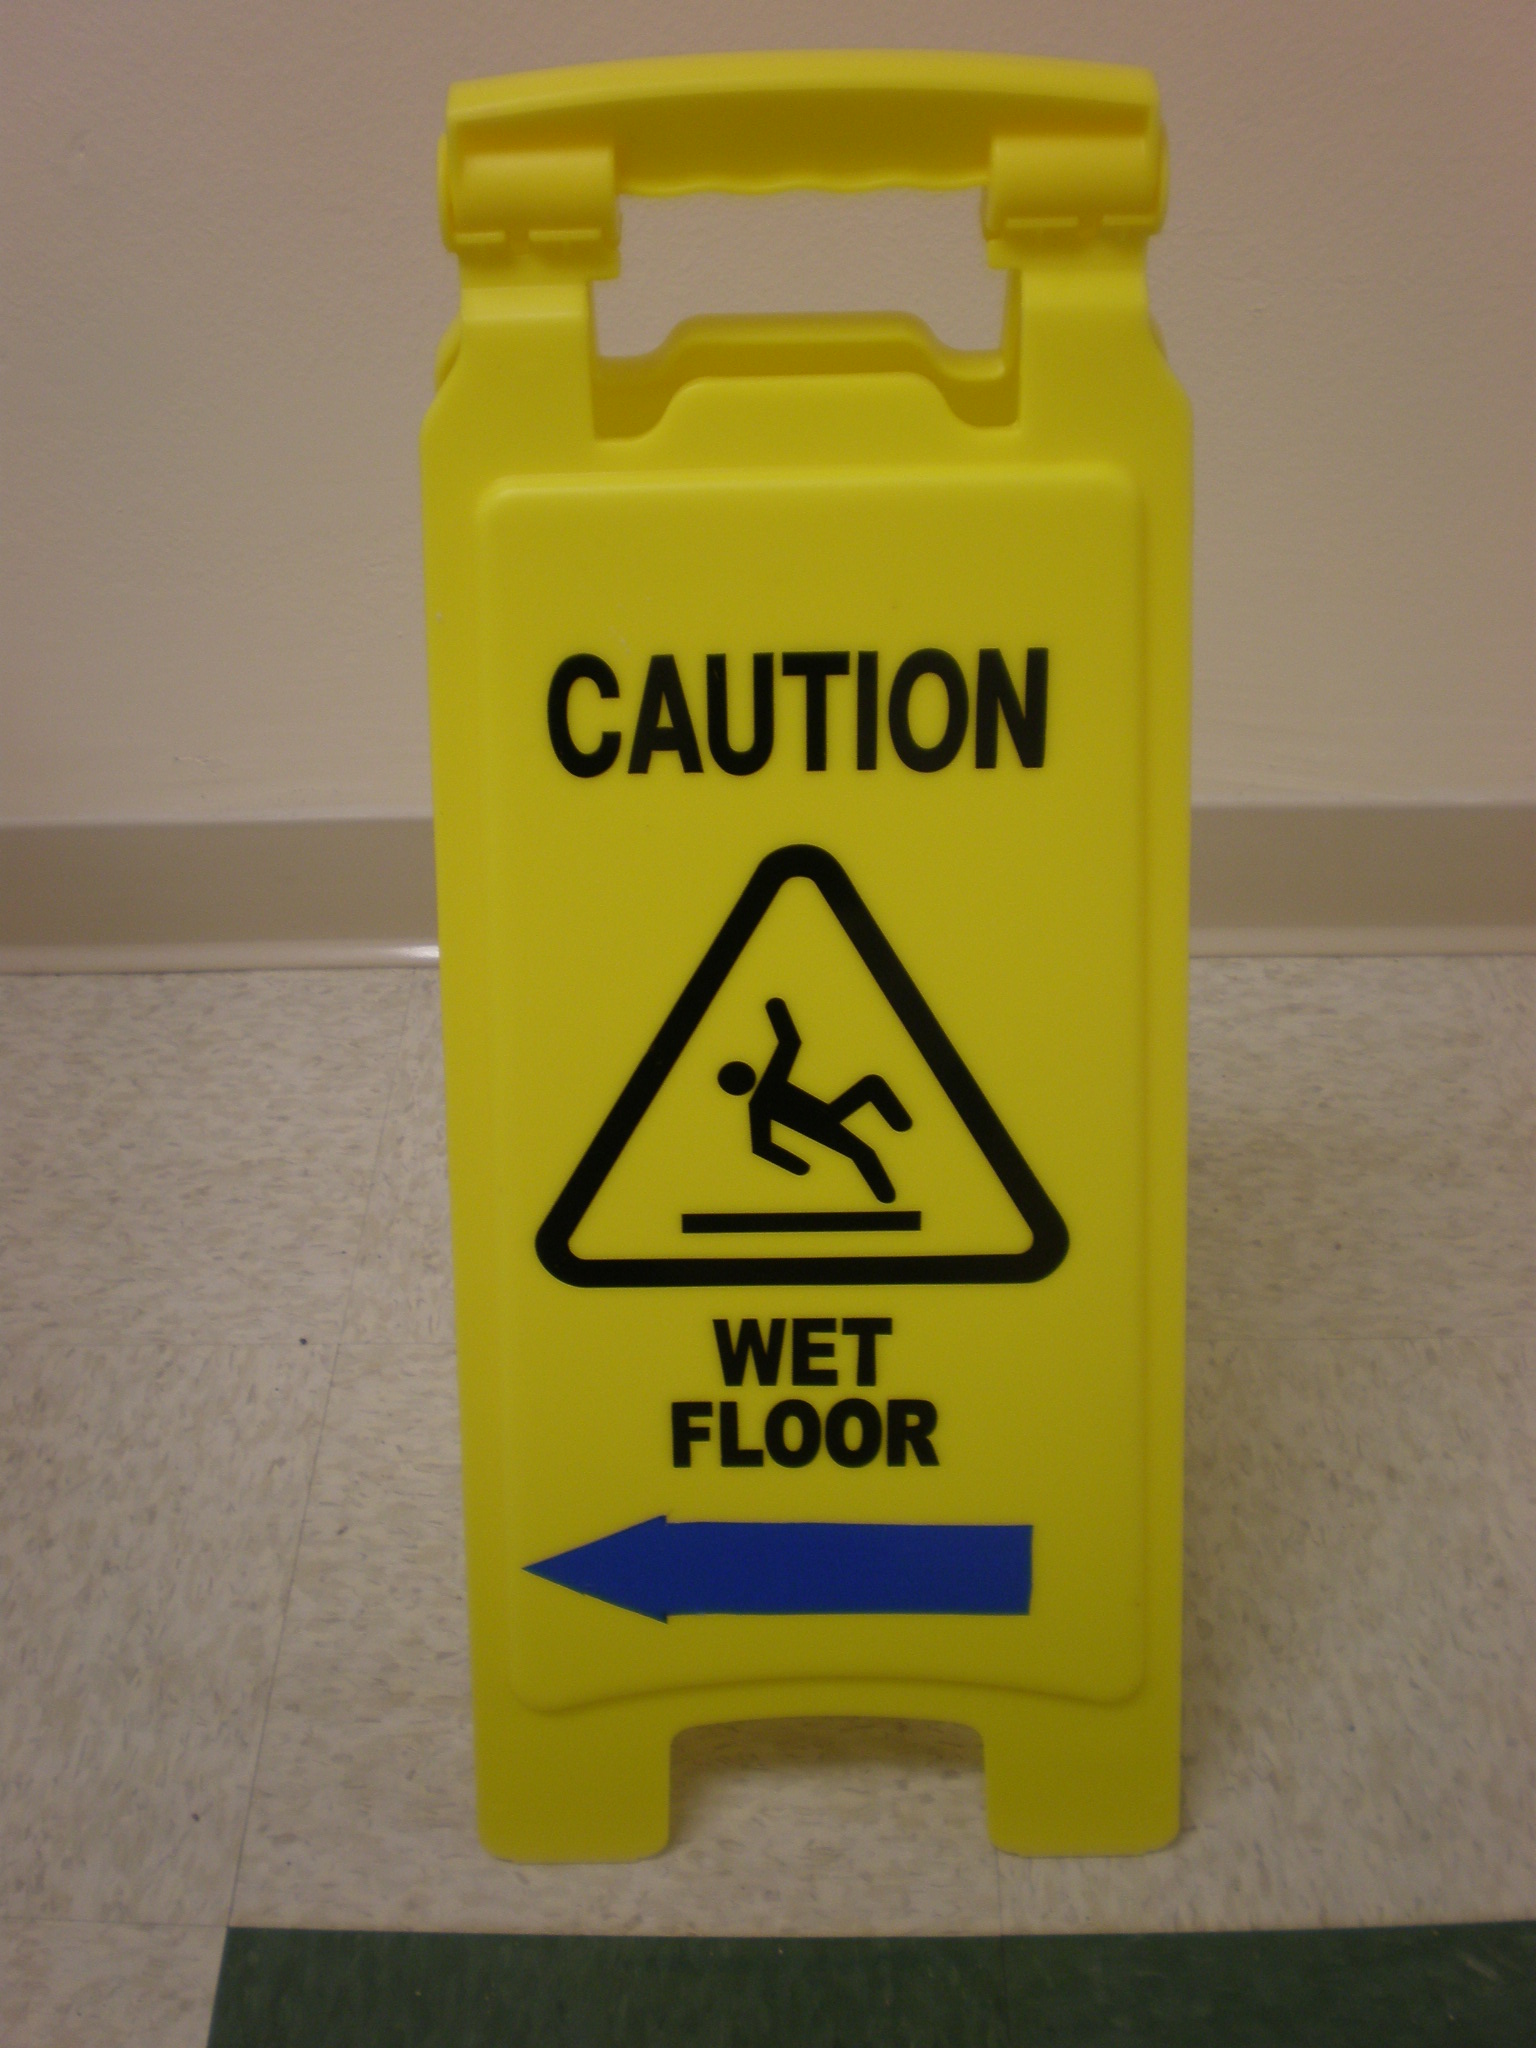 File:Yellow wet floor caution sign in English.JPG - Wikimedia Commons